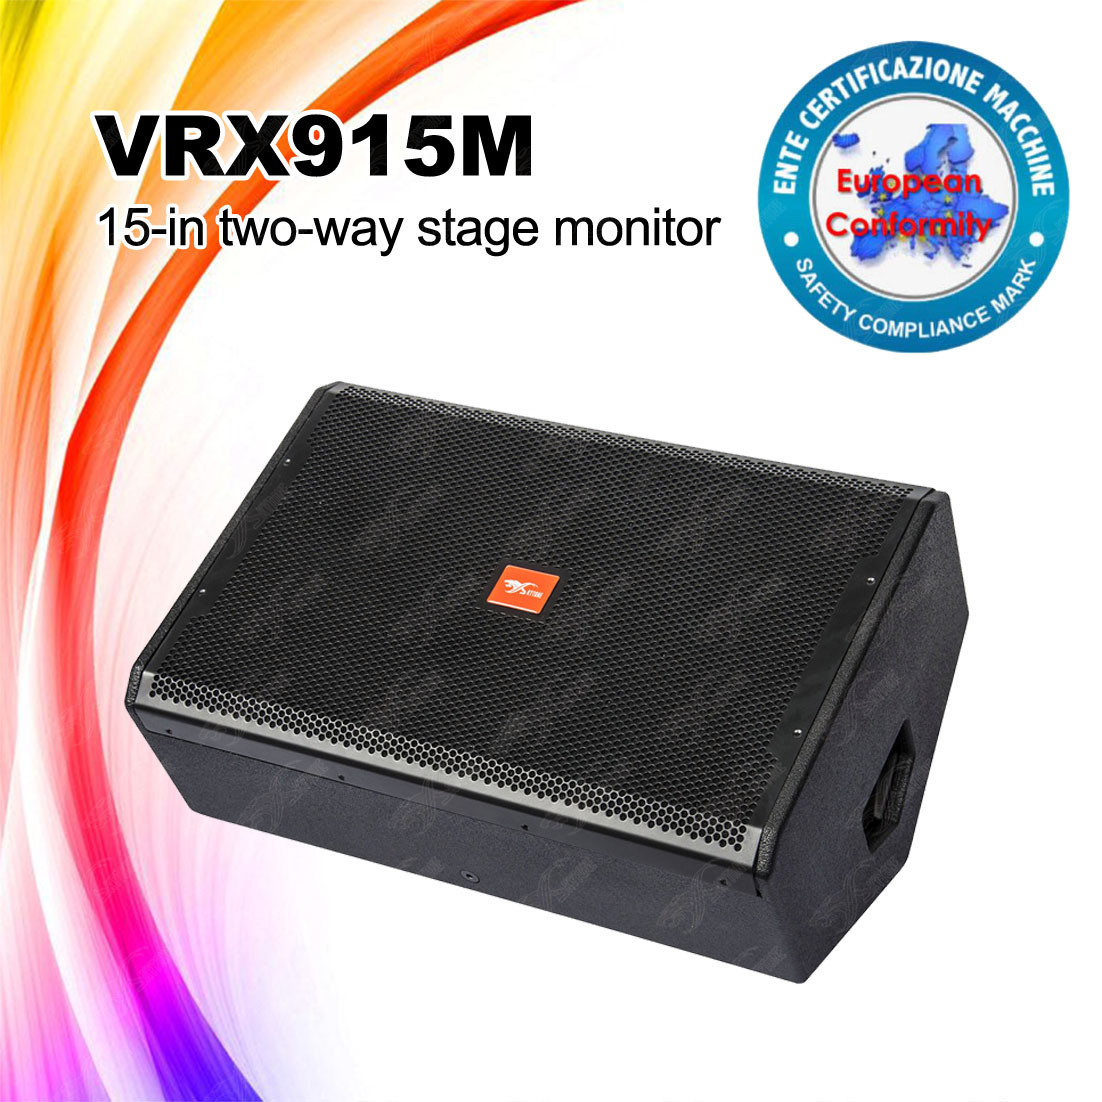 Jbl Style Vrx915m Professional Stage Equipment